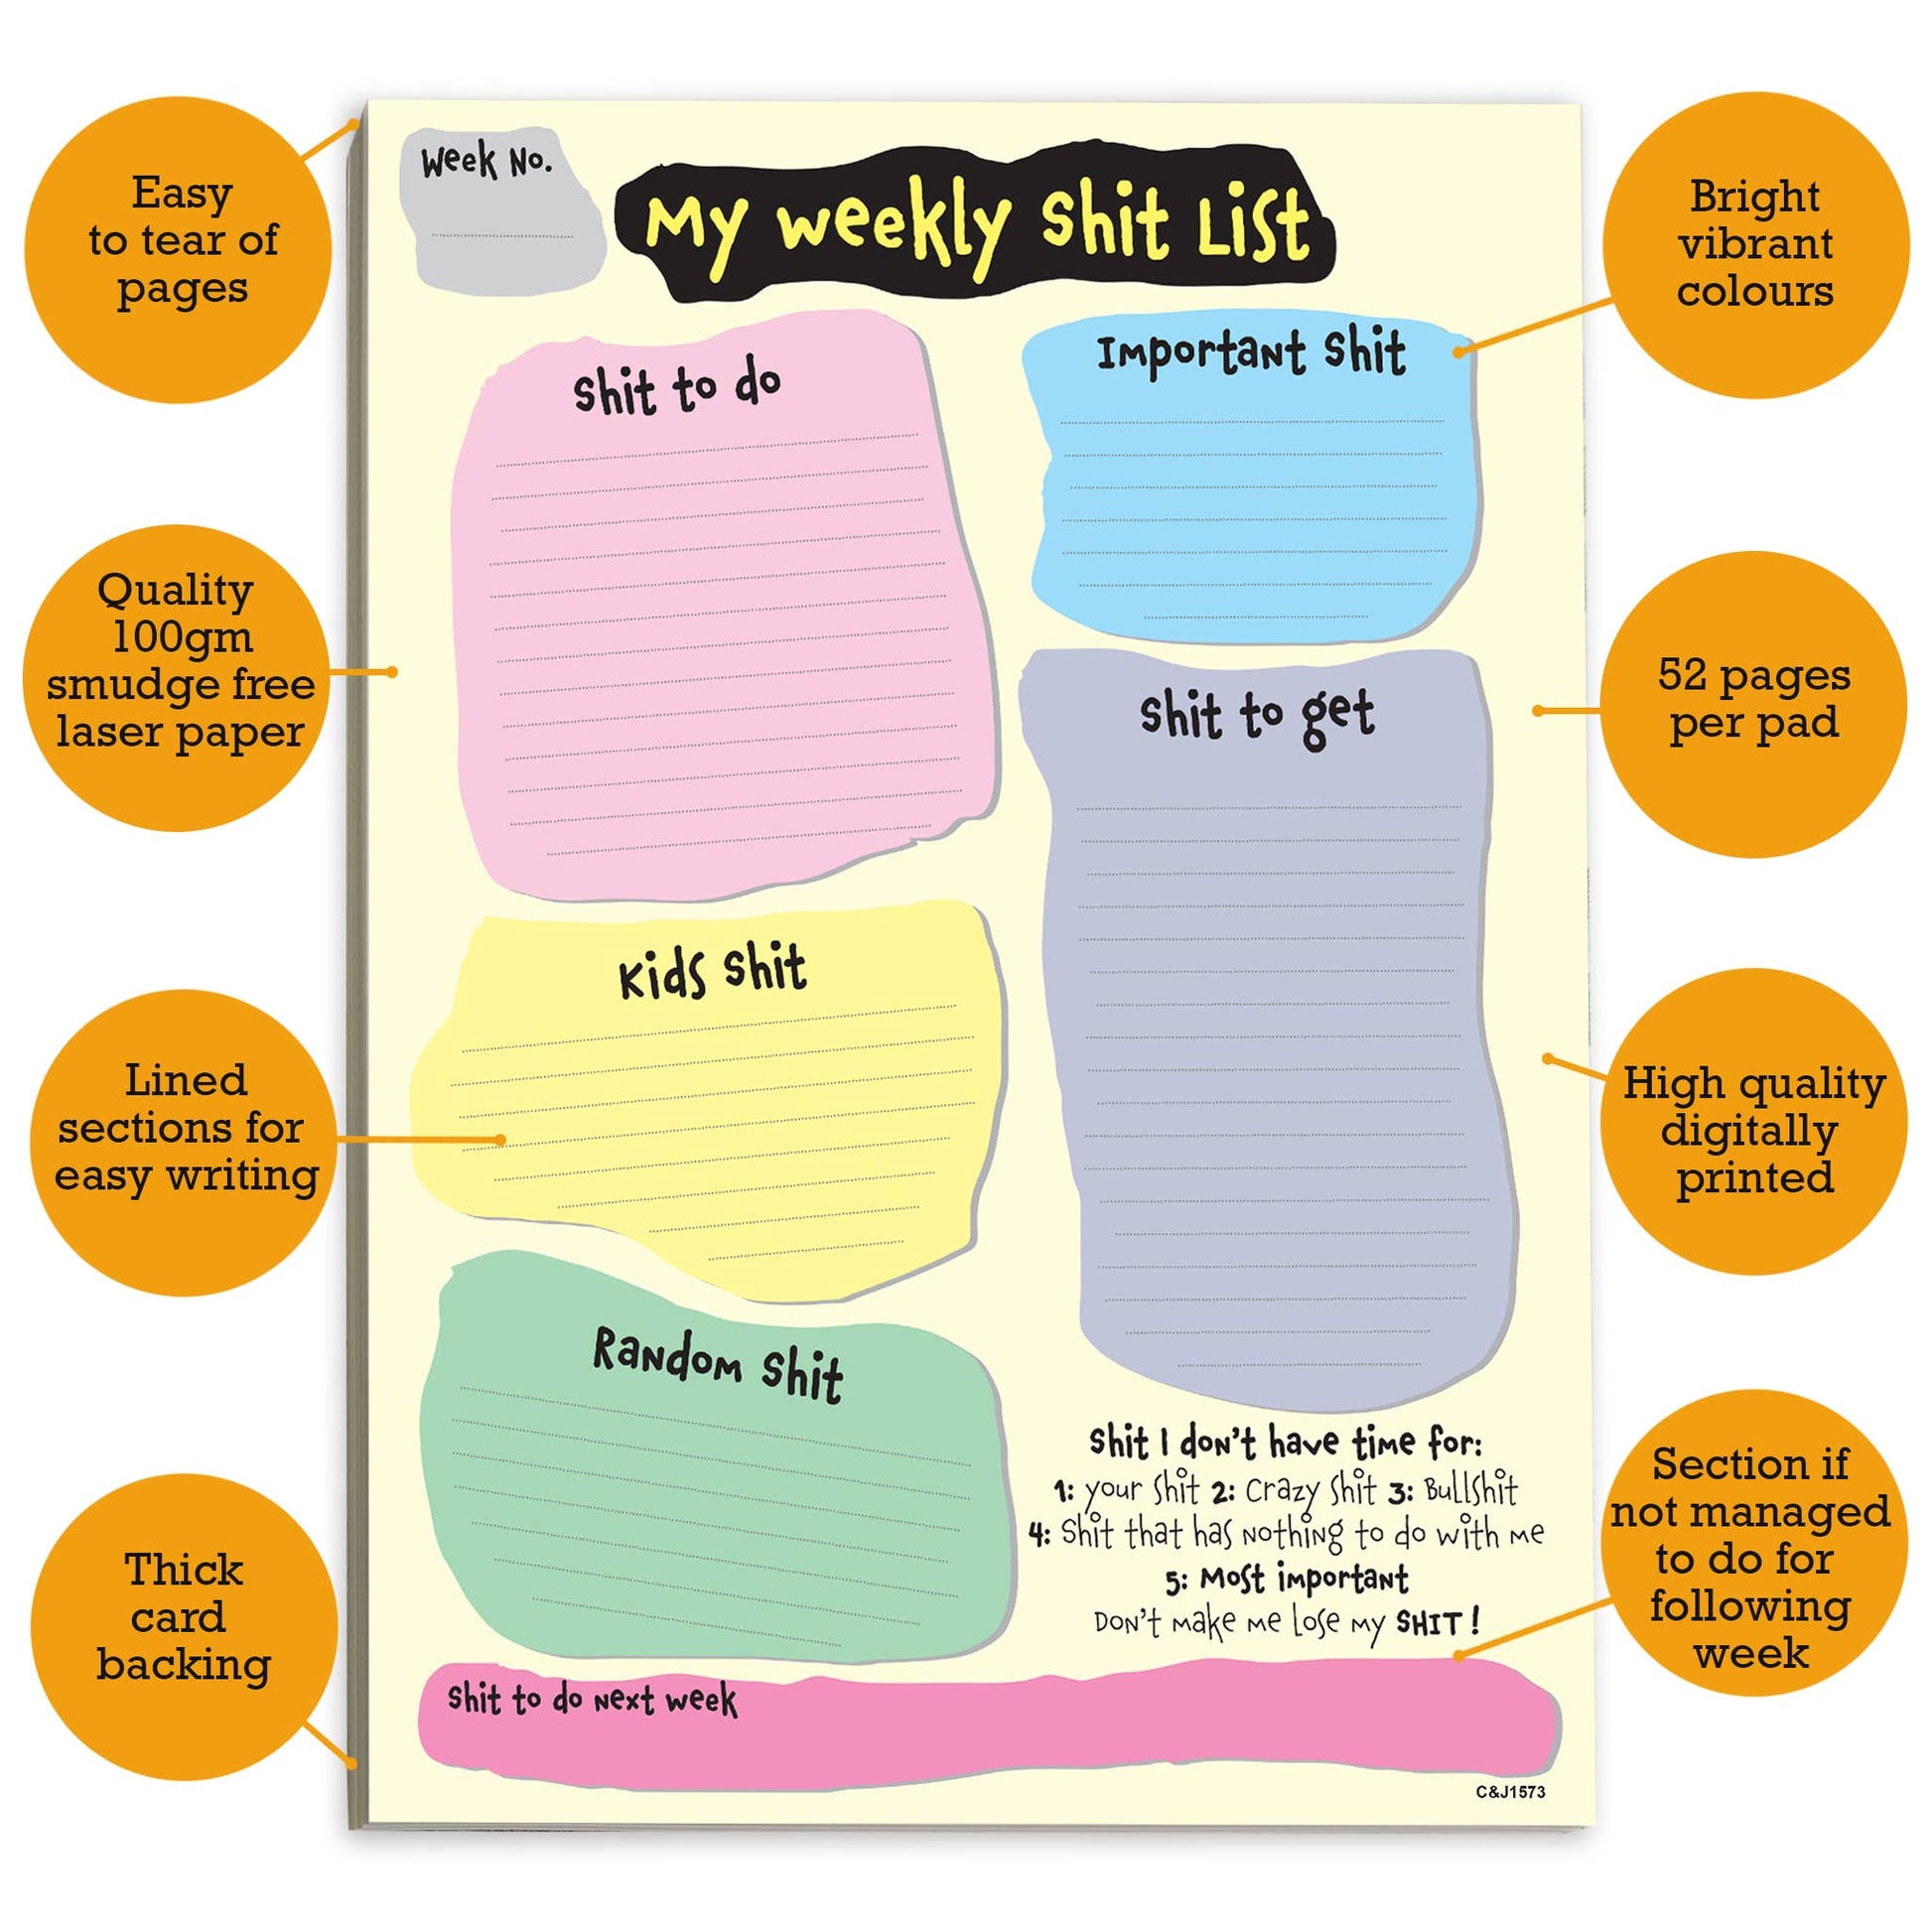 #1573 A4 Weekly Shit List Close to the Bone Greeting Cards and Gifts